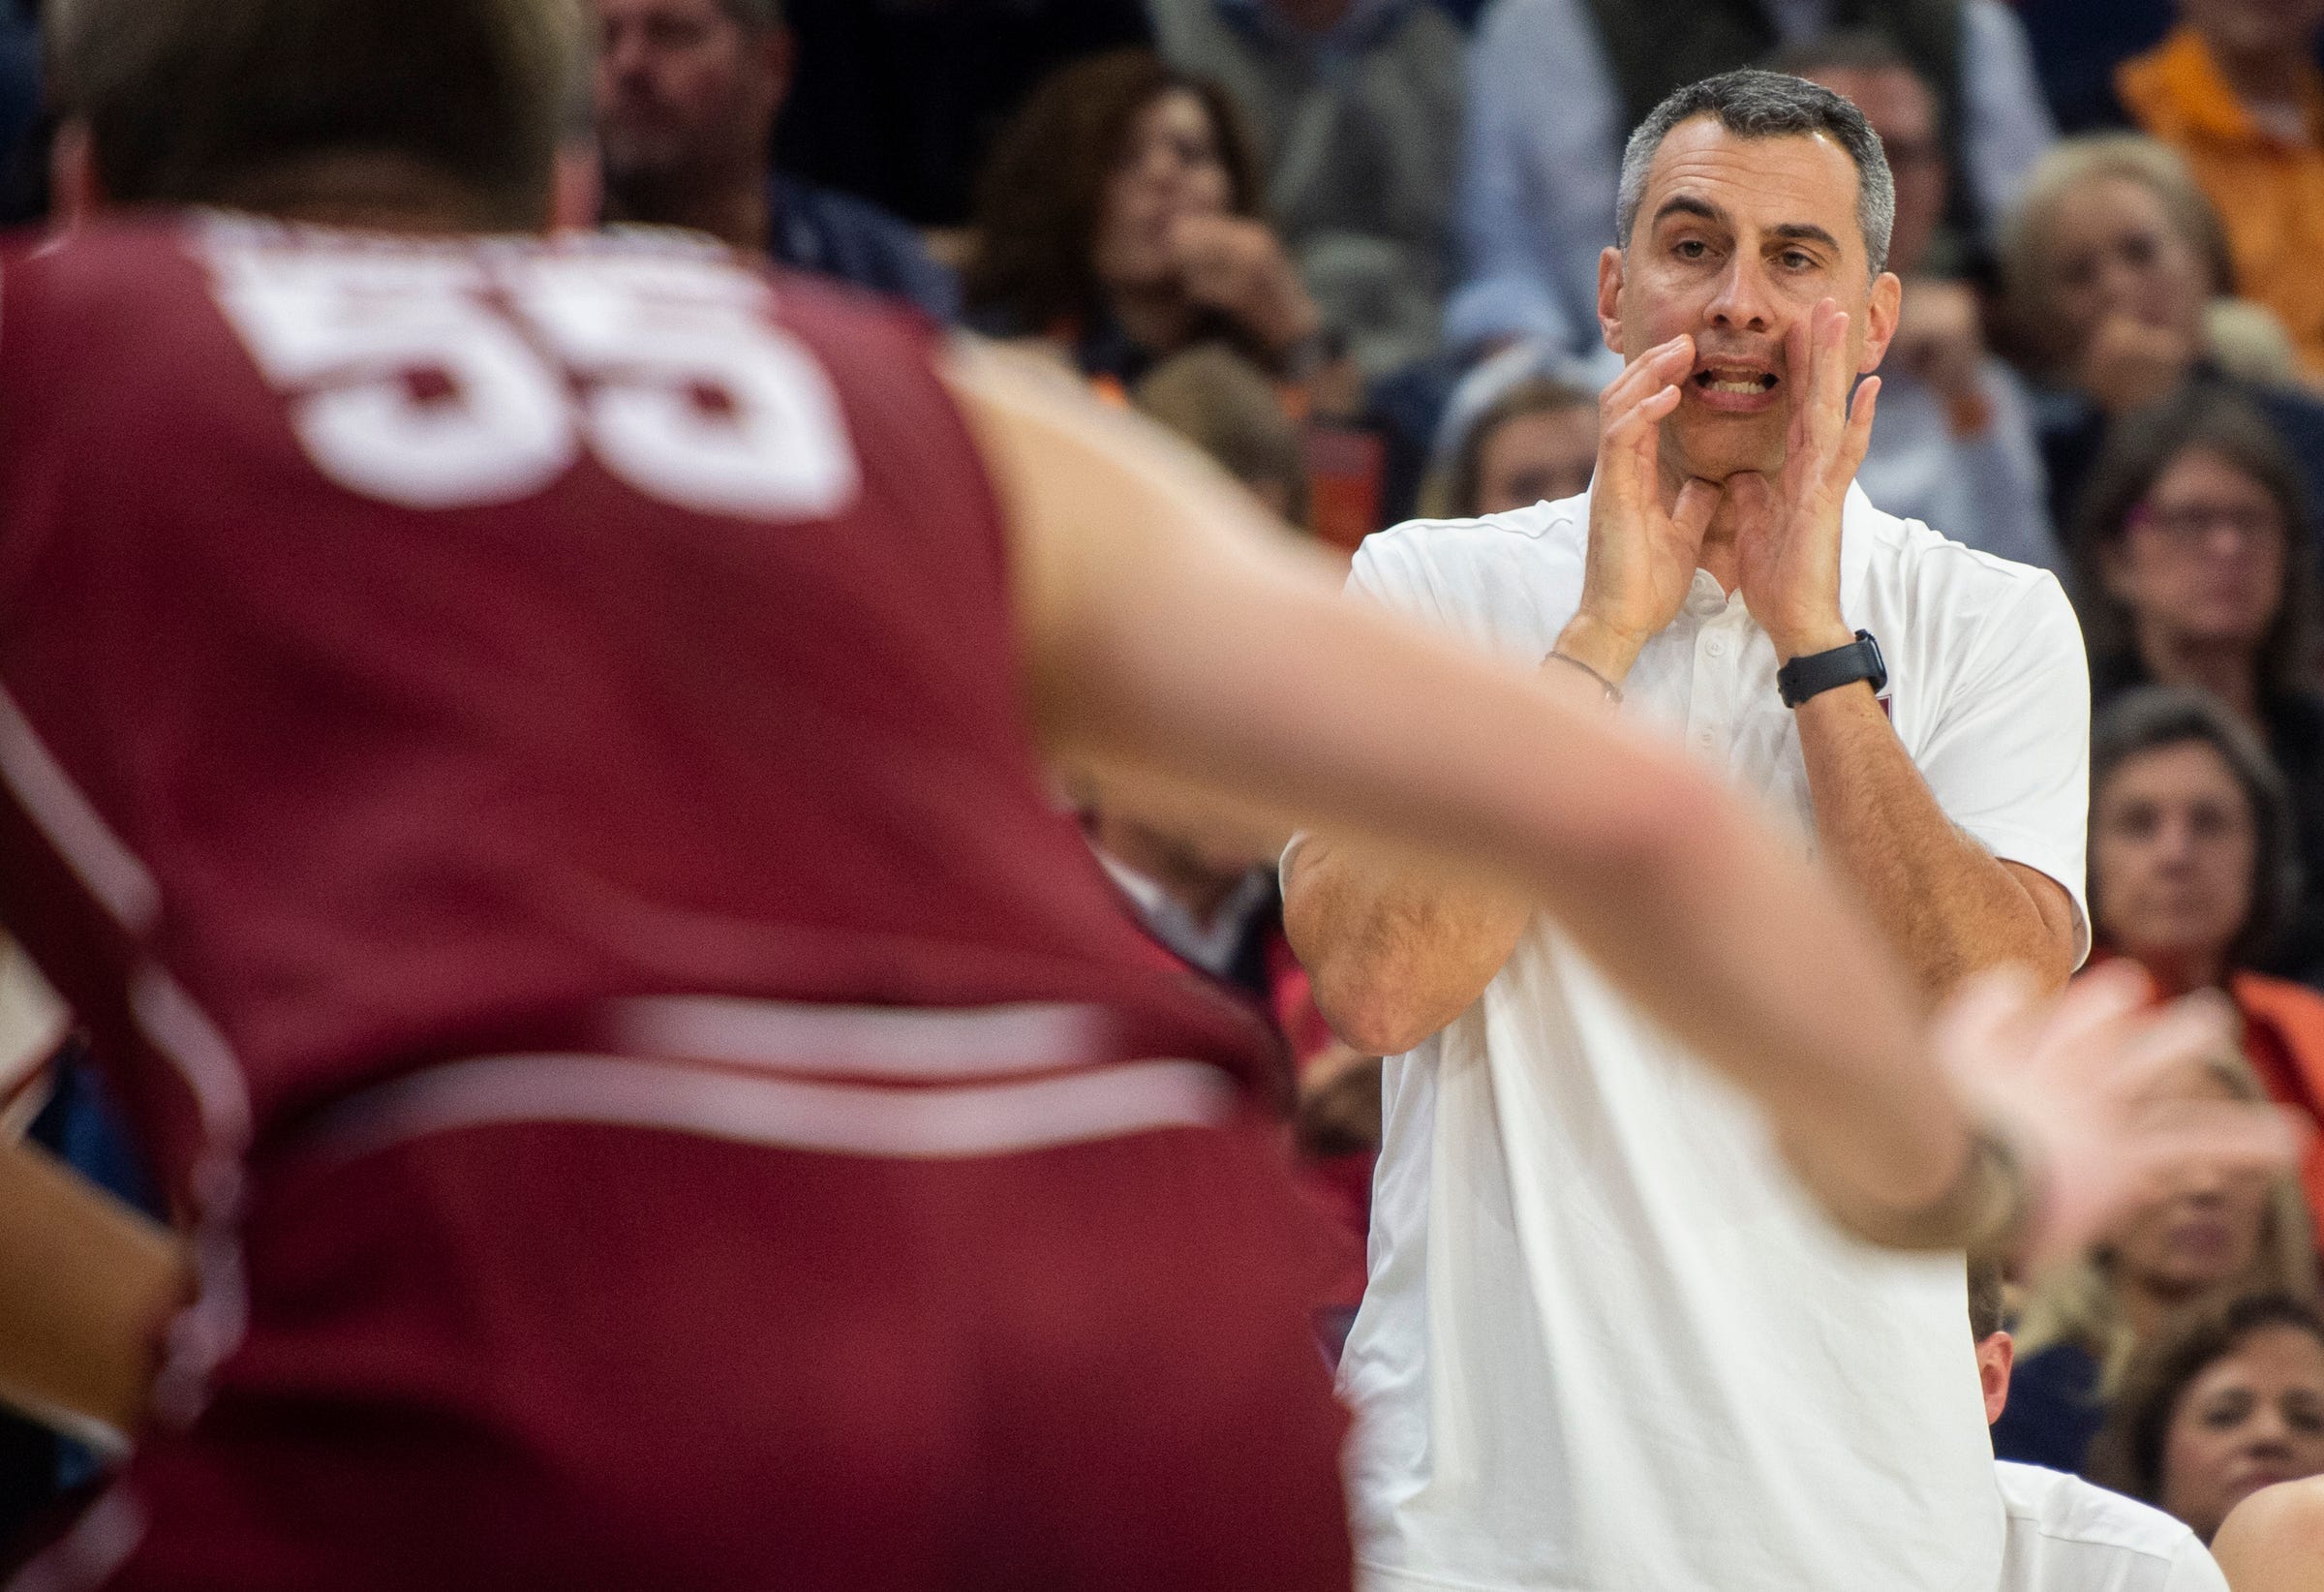 Colgate Raiders head coach Matt Langel talks with his team from the sideline as Auburn Tigers take on Colgate Raiders at Neville Arena in Auburn, Ala., on Friday, Dec. 2, 2022. Auburn Tigers lead Colgate Raiders 47-33 at halftime.